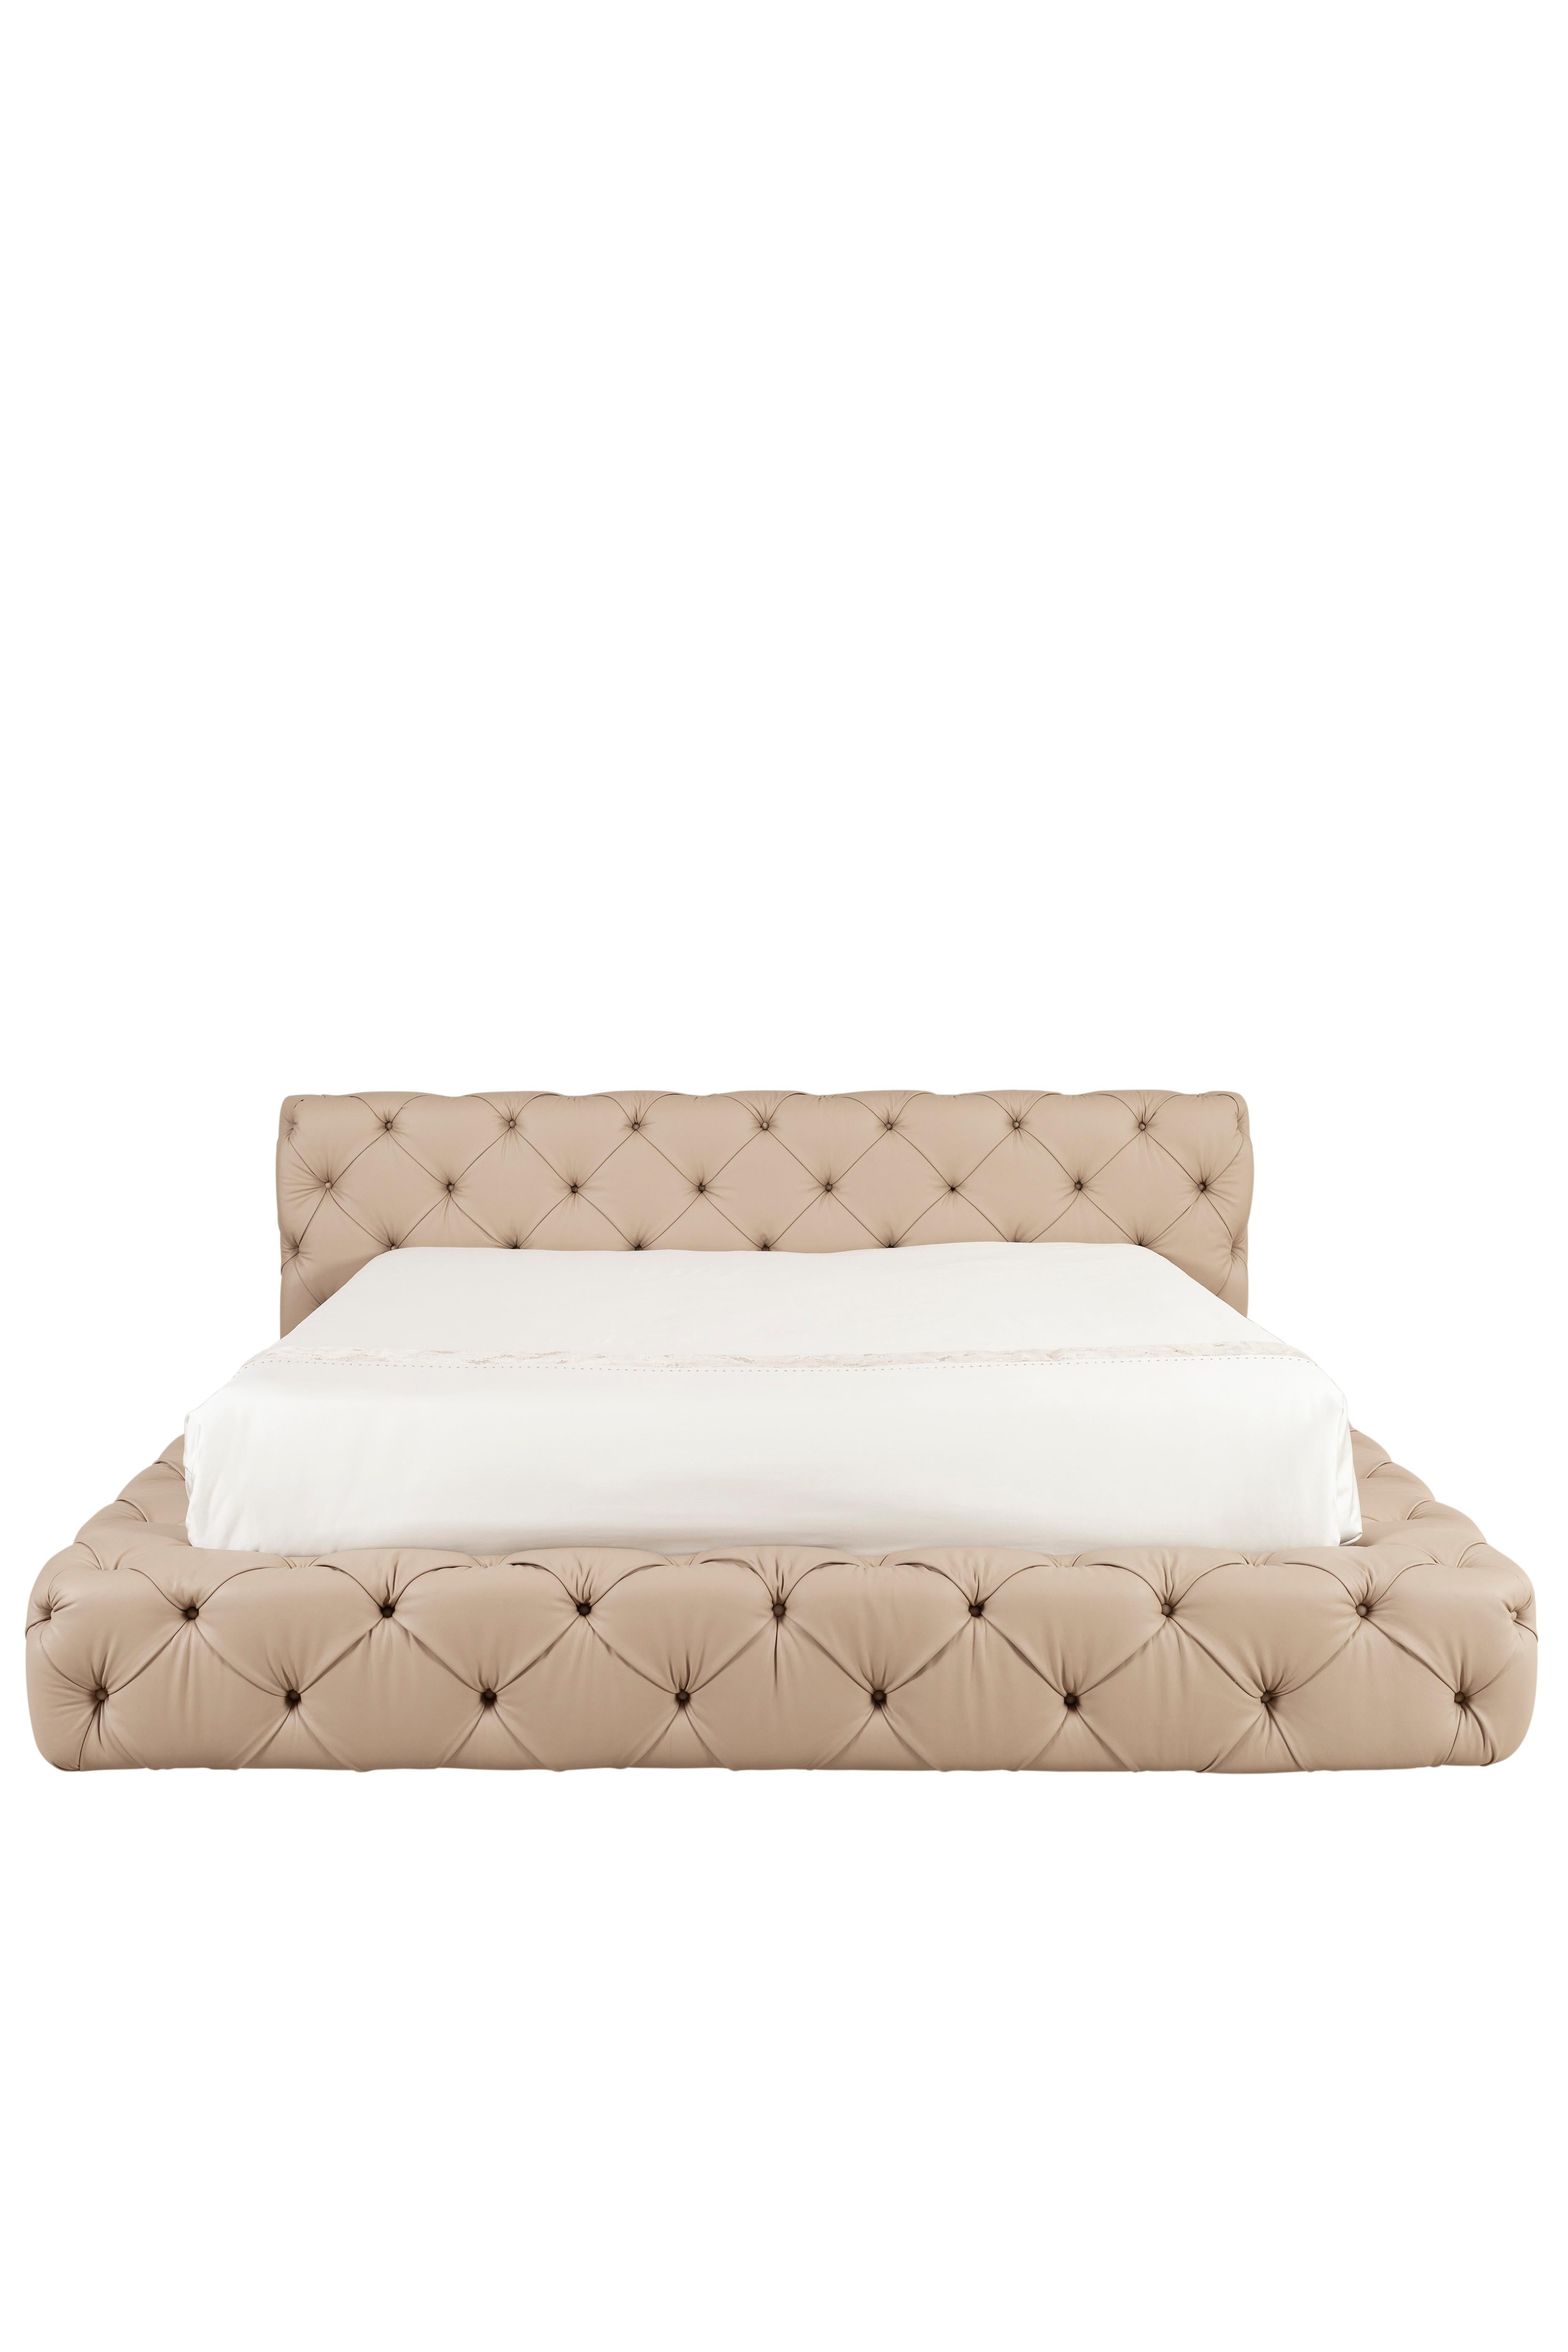 Hand-Crafted Modern Fluffy Bed Italian Leather Capitonnè, Handmade in Portugal by Greenapple For Sale